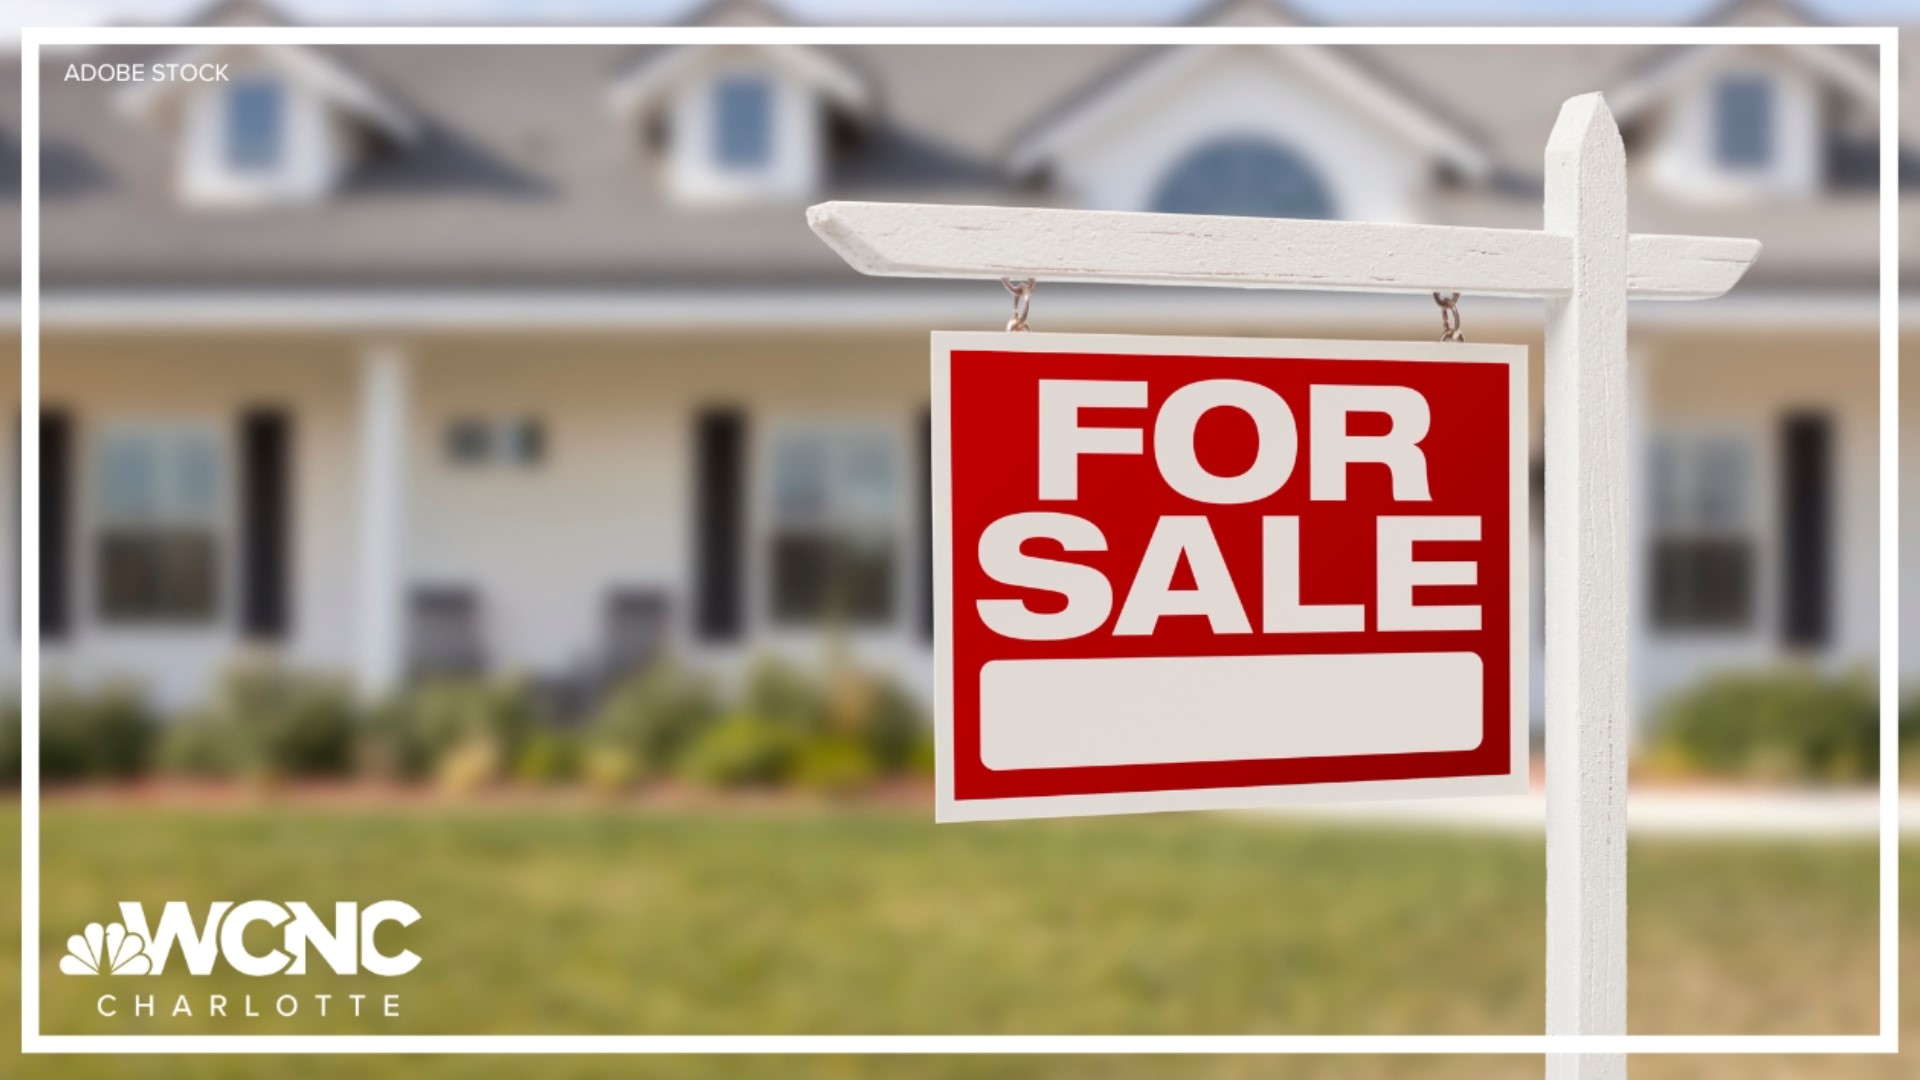 With interest rates hovering around the 7.4% range, many would-be homebuyers are vacillating about the opportunity to buy a home.